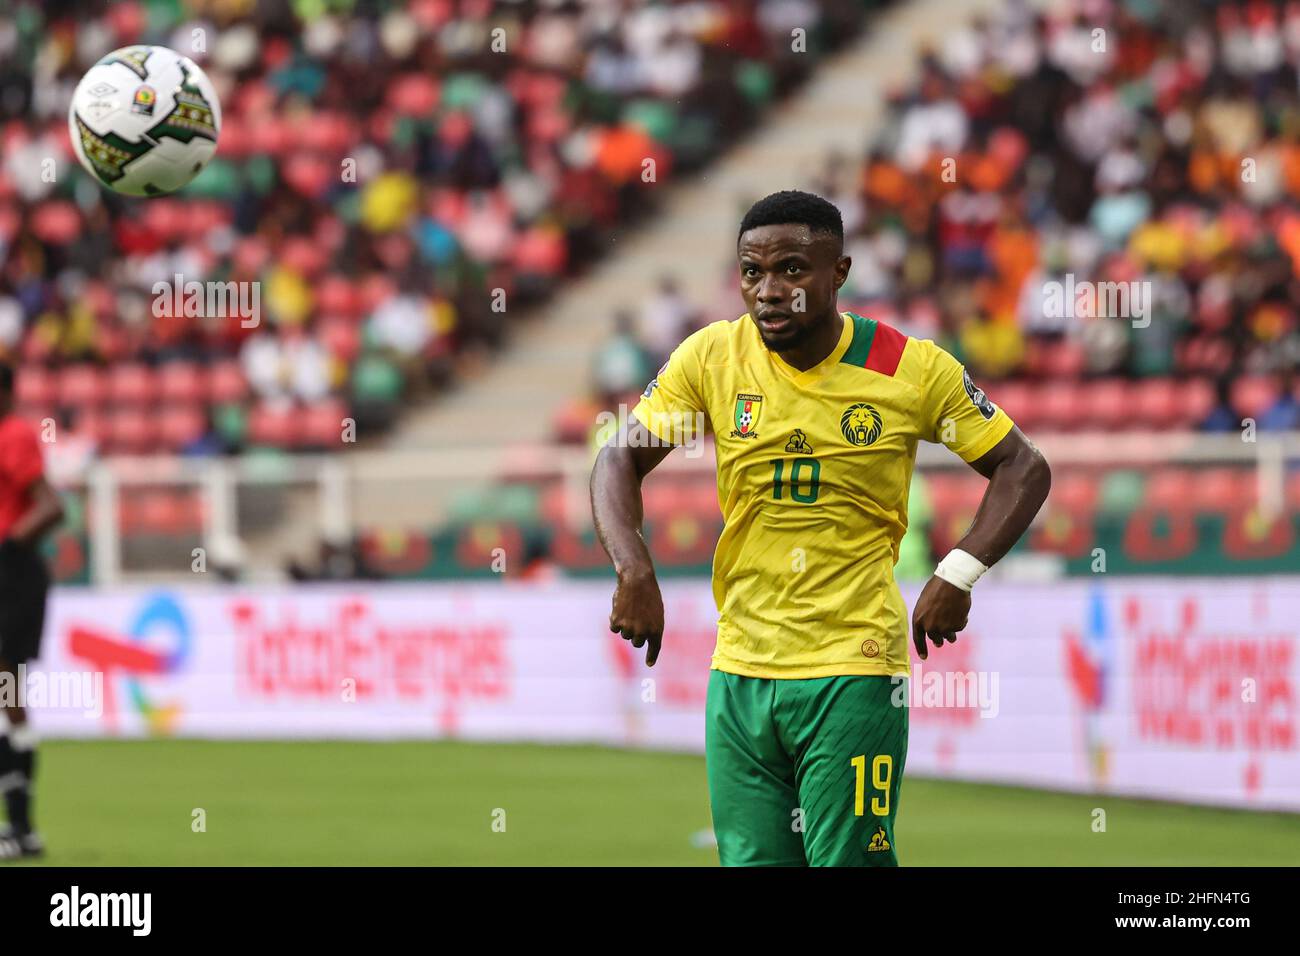 YAOUNDE, CAMEROON - JANUARY 17: Collins Fai of Cameroon, Standard Liege during the 2021 Africa Cup of Nations group A match between Cape Verde and Cameroon at Stade d'Olembe on January 17, 2022 in Yaounde, Cameroon. (Photo by SF) Stock Photo